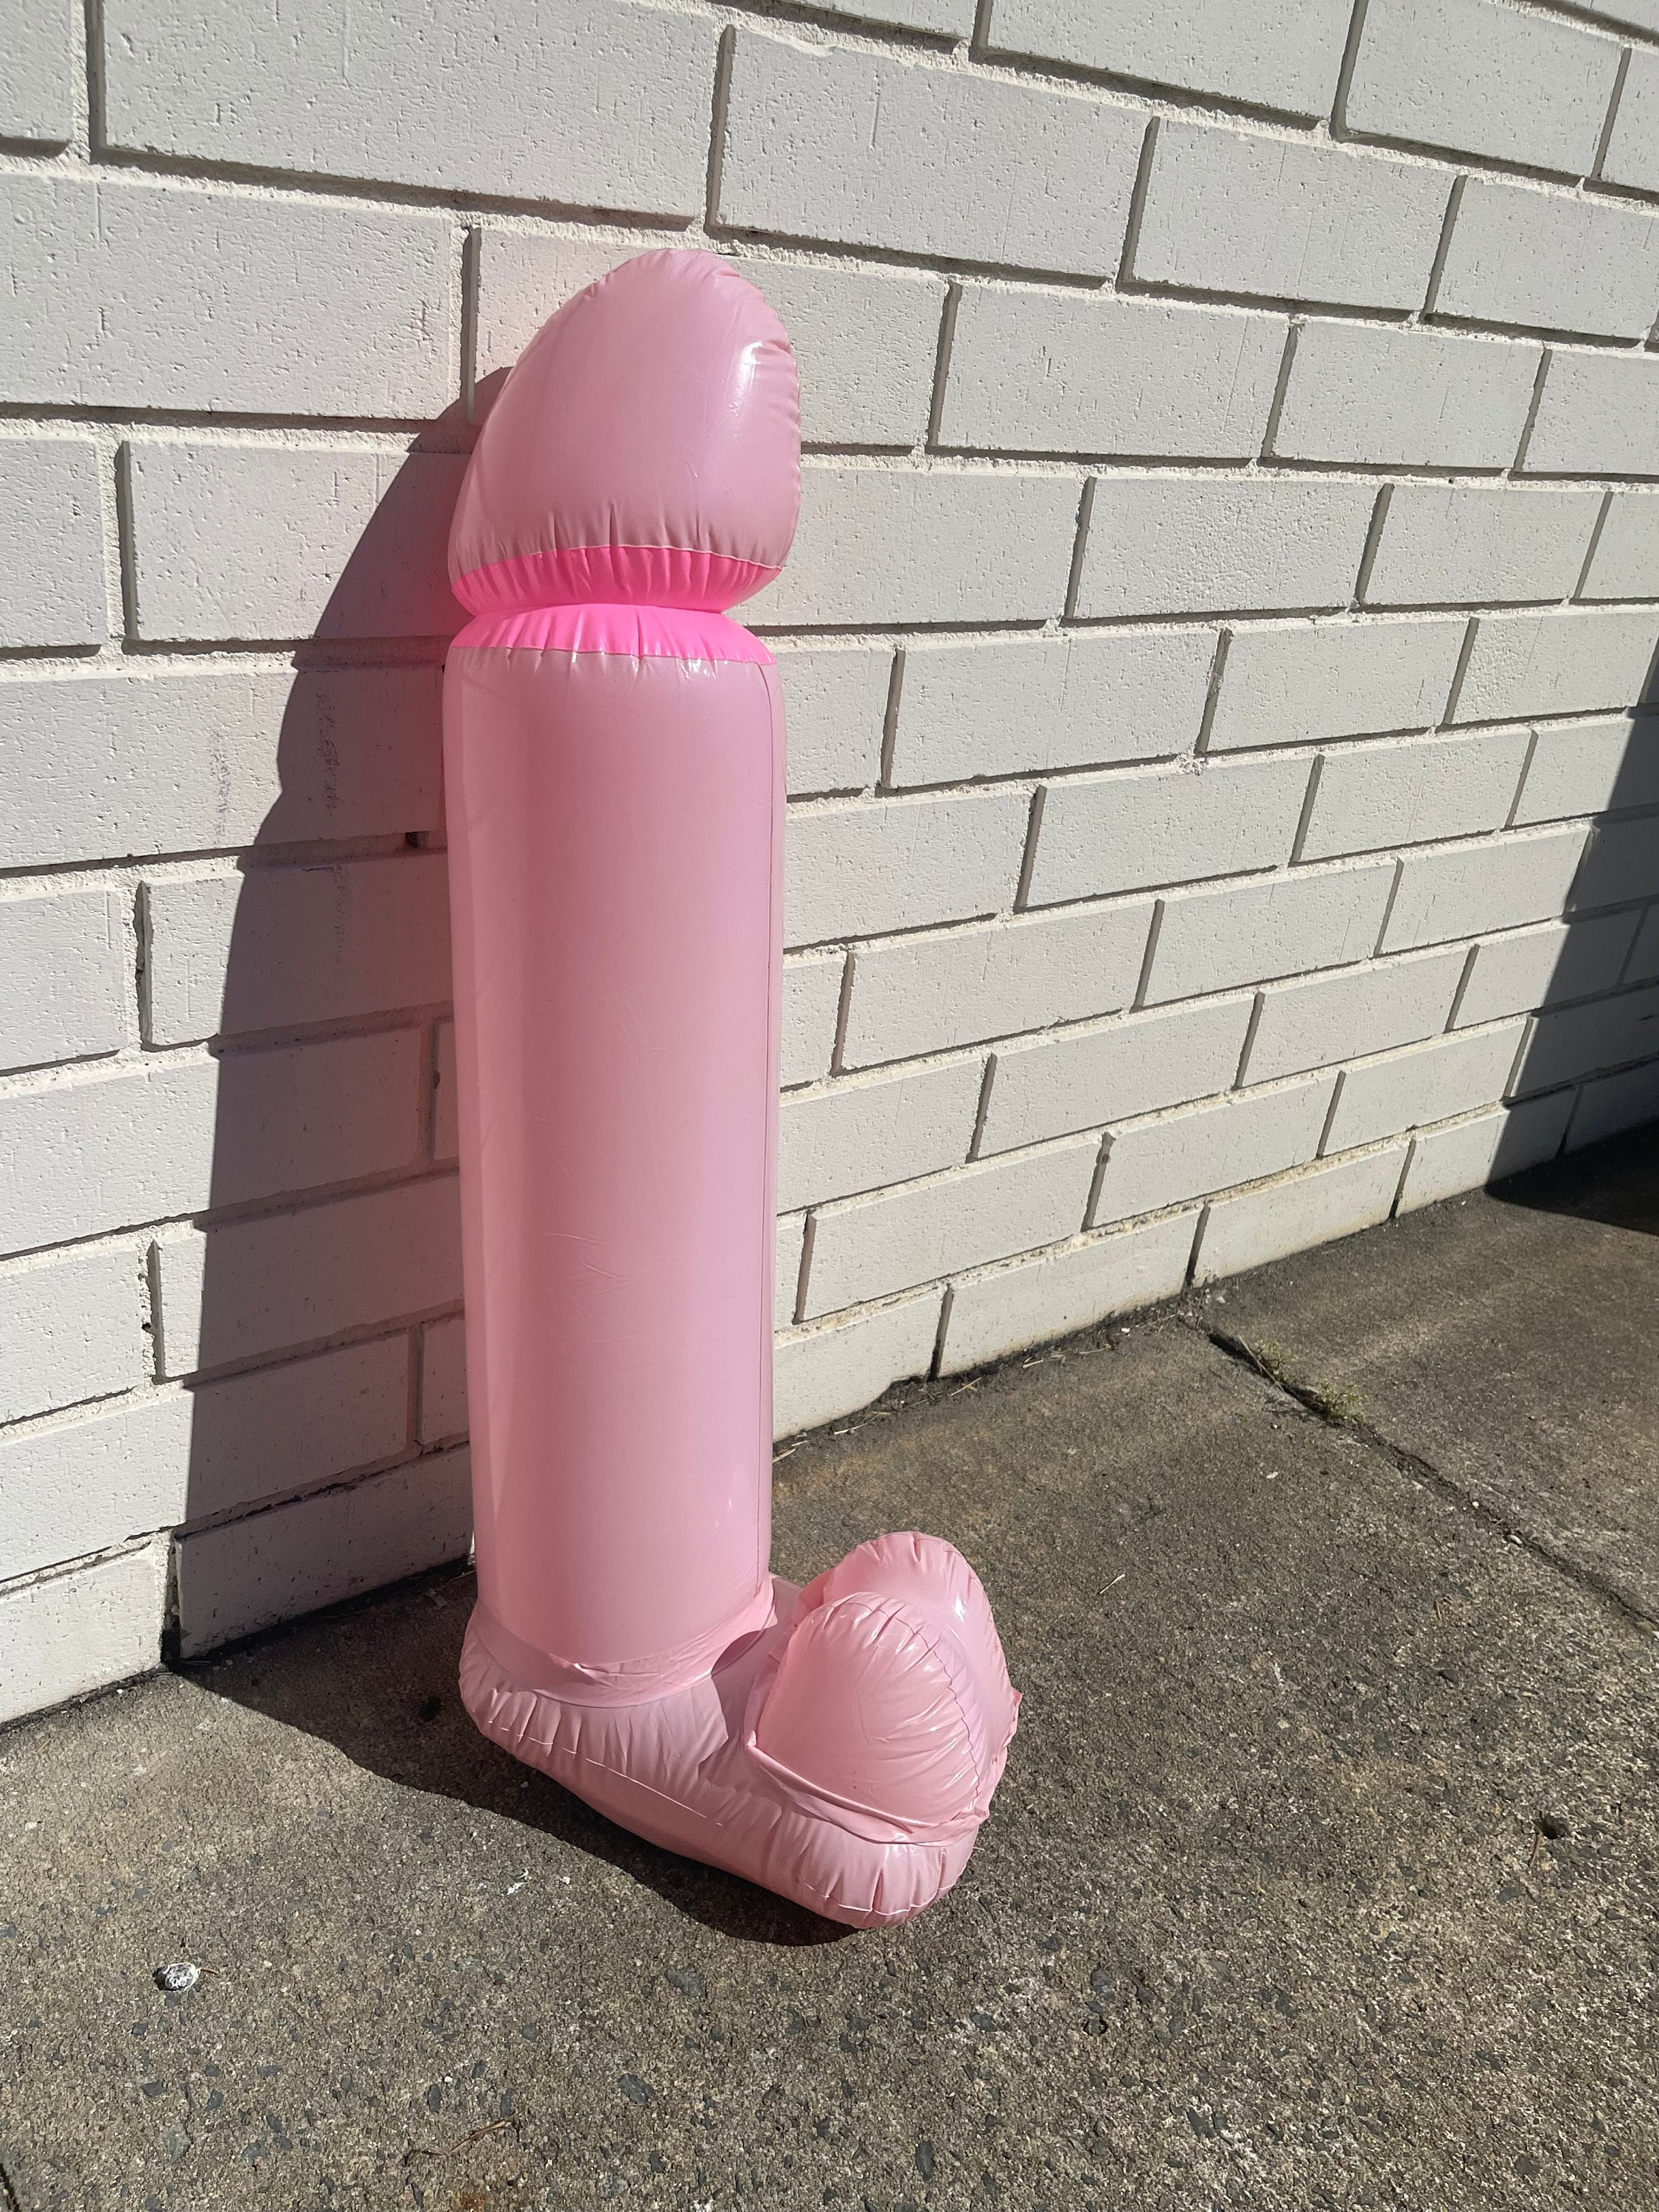 Bachelorette Party Blow Up Penis: Hilarious Bach Party Decor & Gag Gift